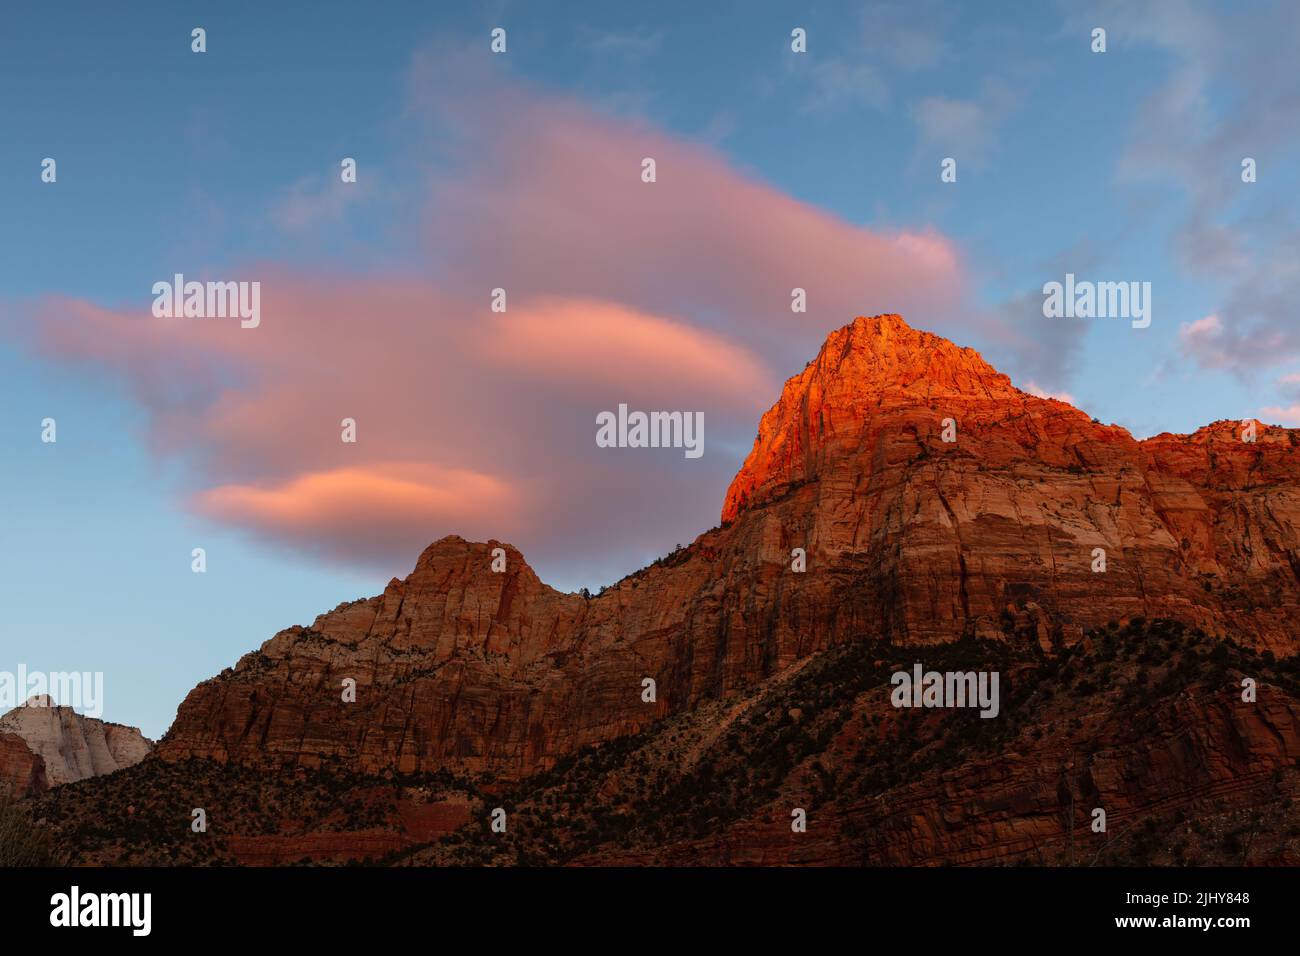 Clouds over the cliffs at sunset, Zion National Park, Utah Stock Photo